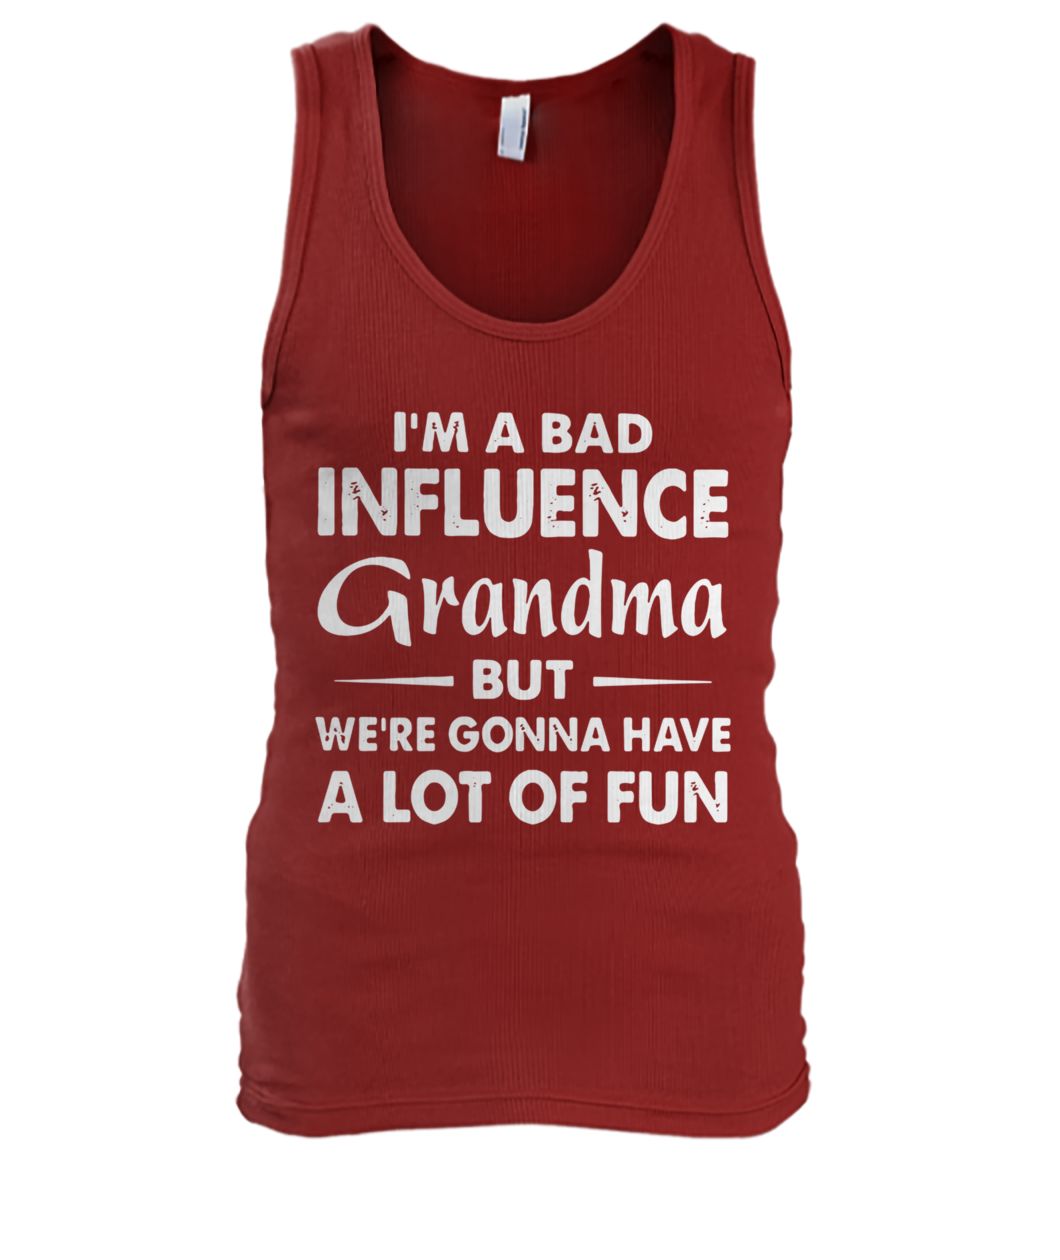 I'm a bad influence grandma but we're gonna have a lot of fun men's tank top